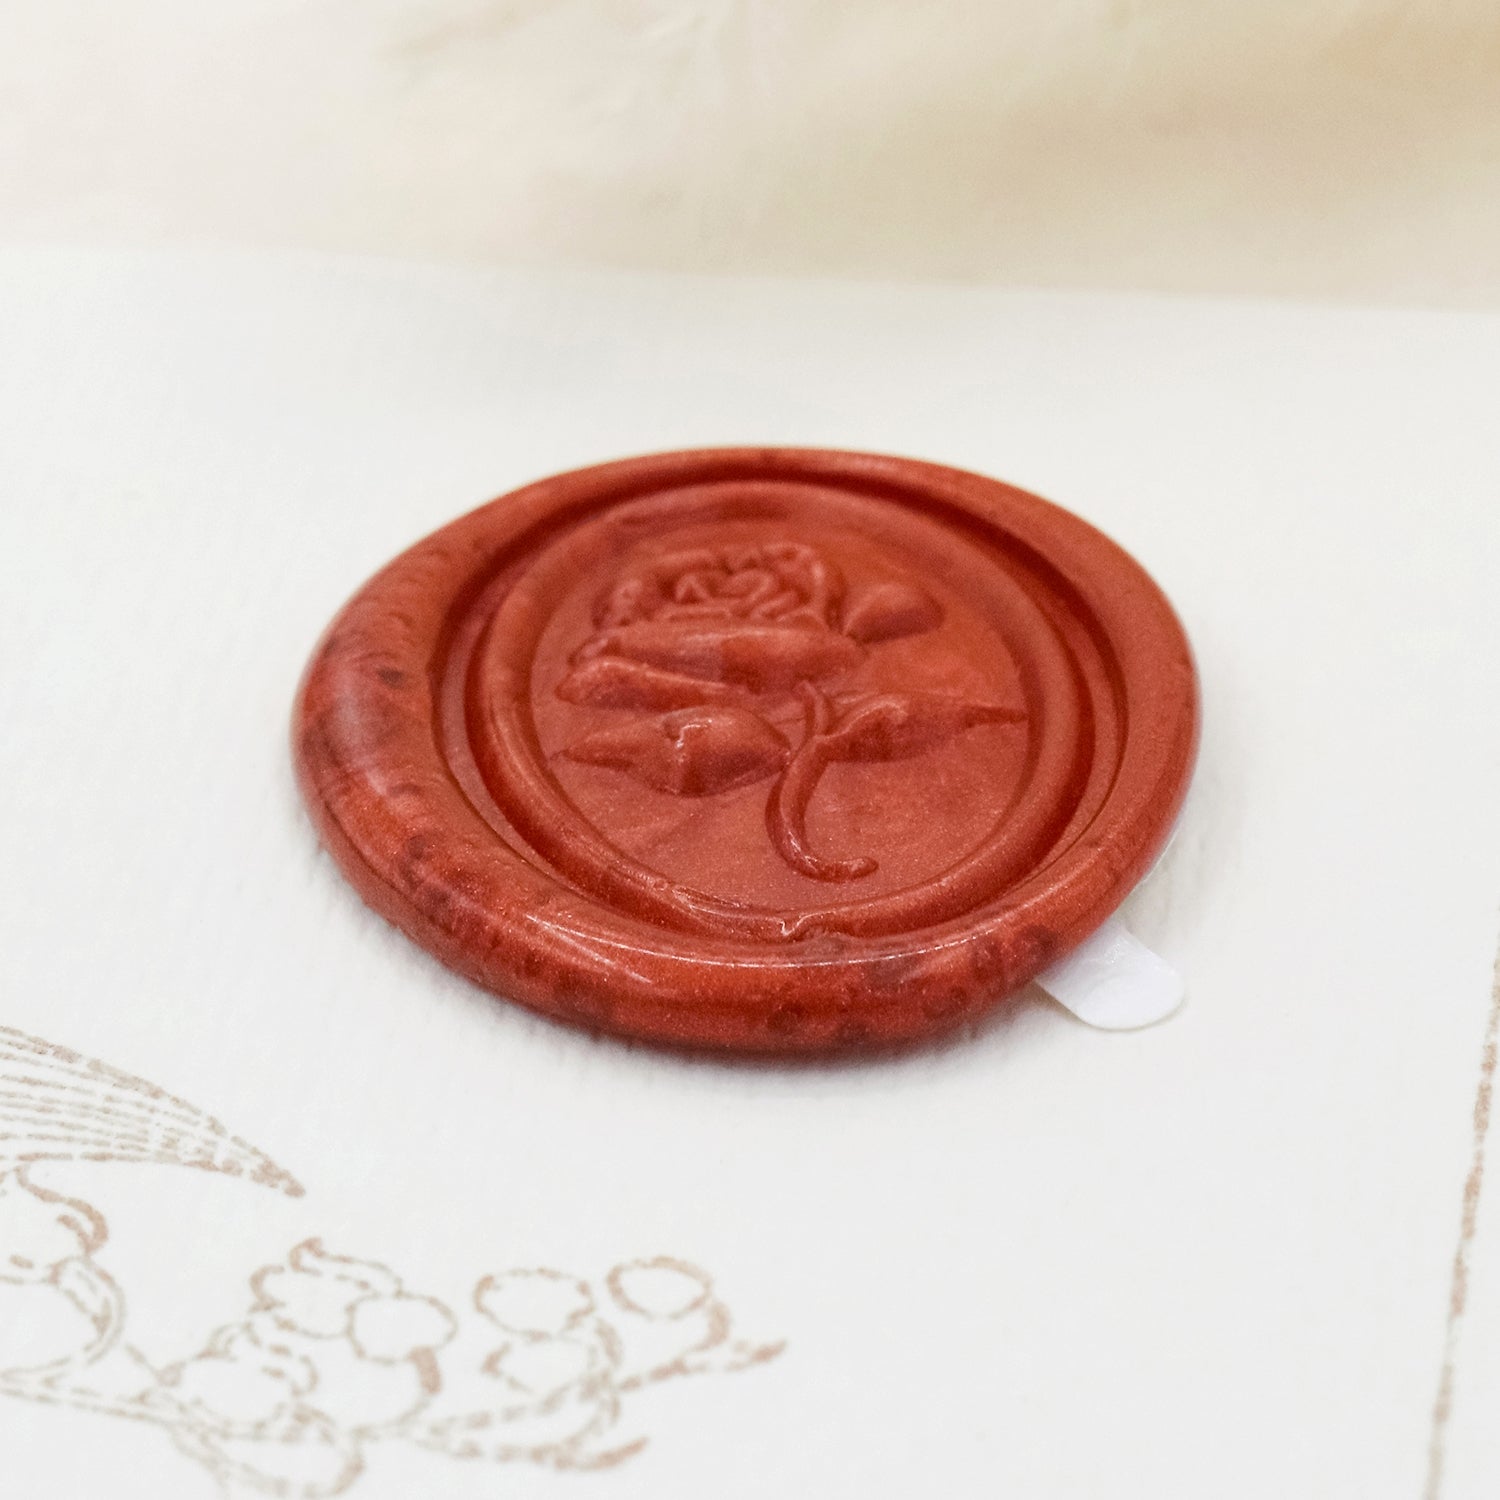 Stamprints 3D Relief Rose Self-adhesive Wax Seal Stickers 4